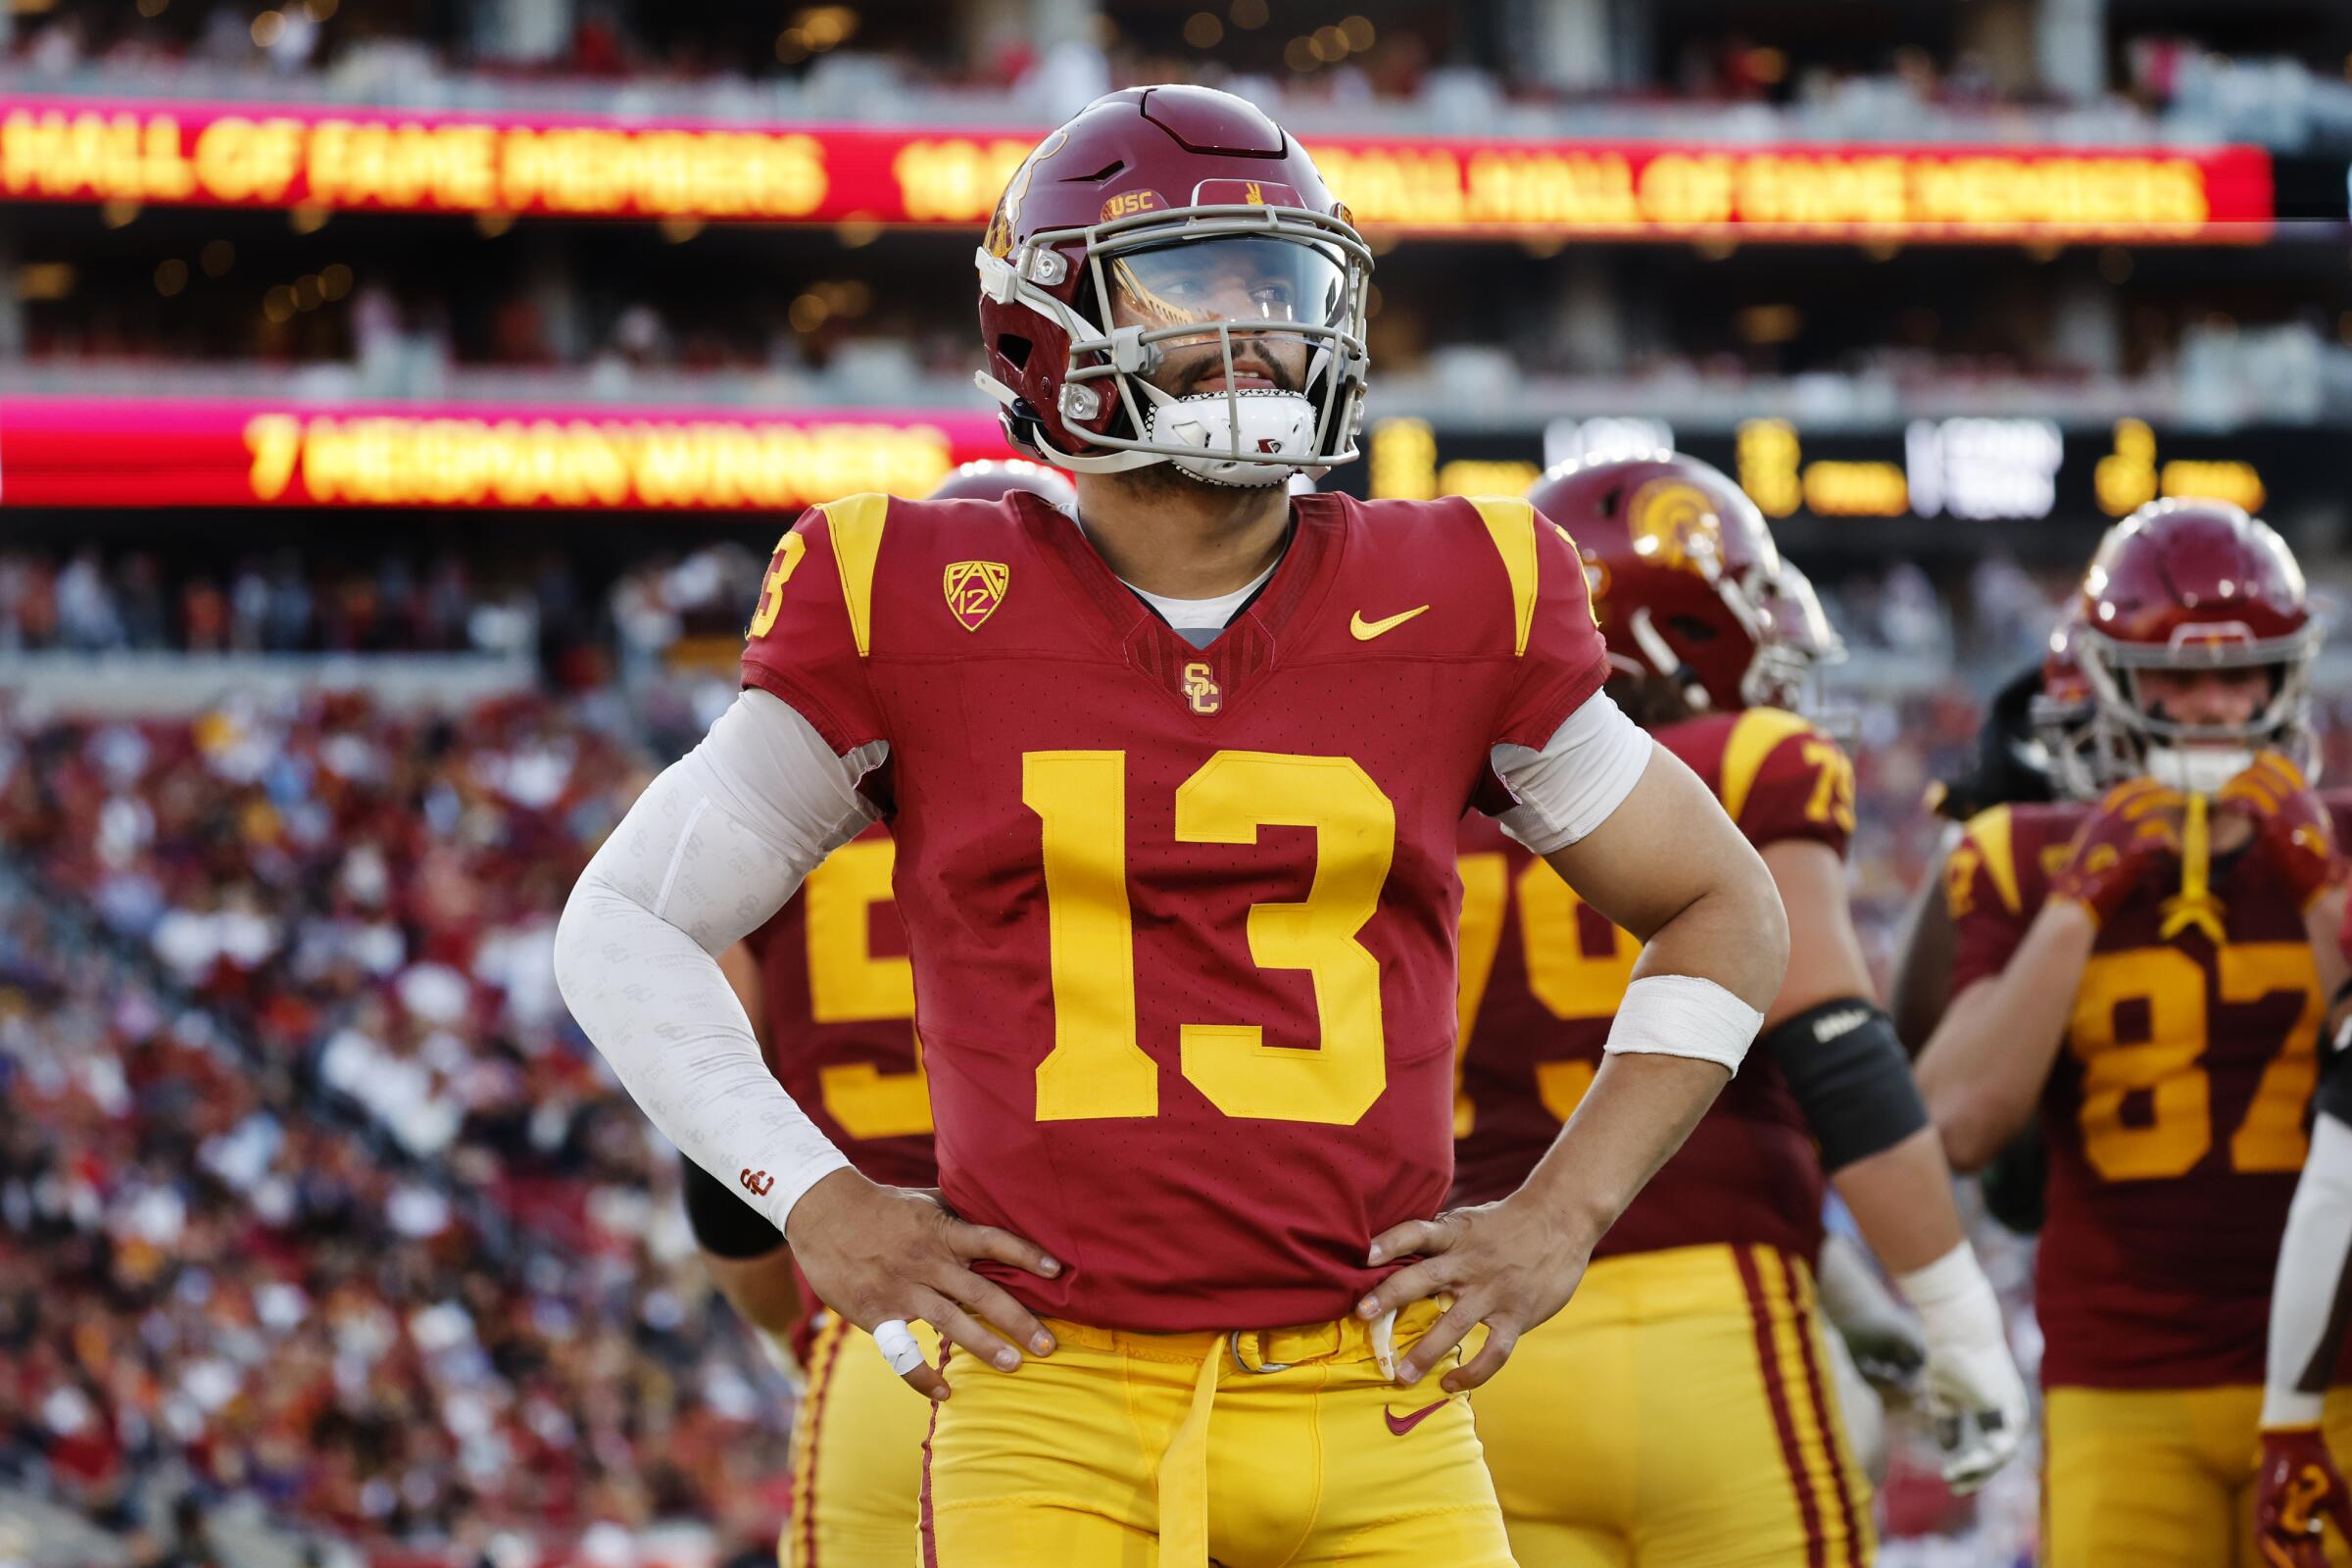 USC quarterback Caleb Williams stands on the sideline during a loss to Washington at the Coliseum on Nov. 4.